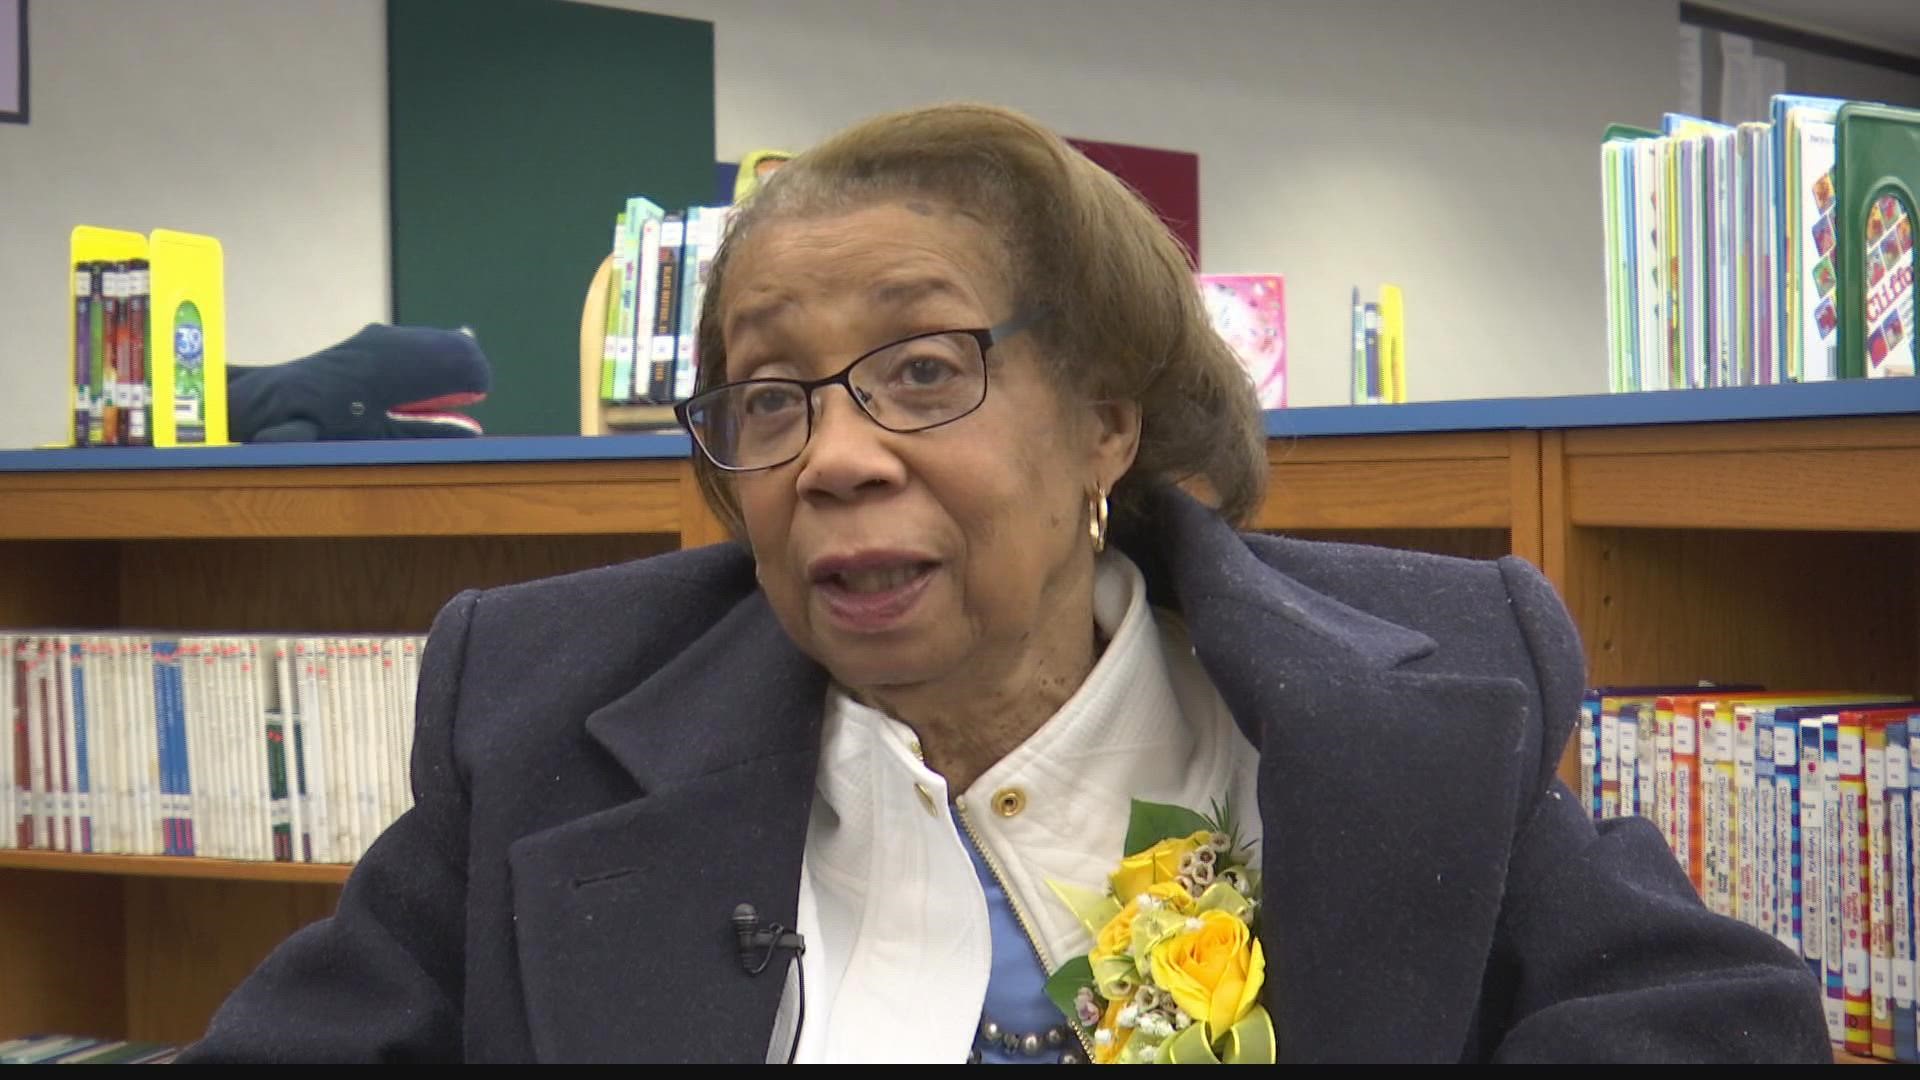 Annie Burns-Hicks taught for more than 40 years at the school, mostly first grade.